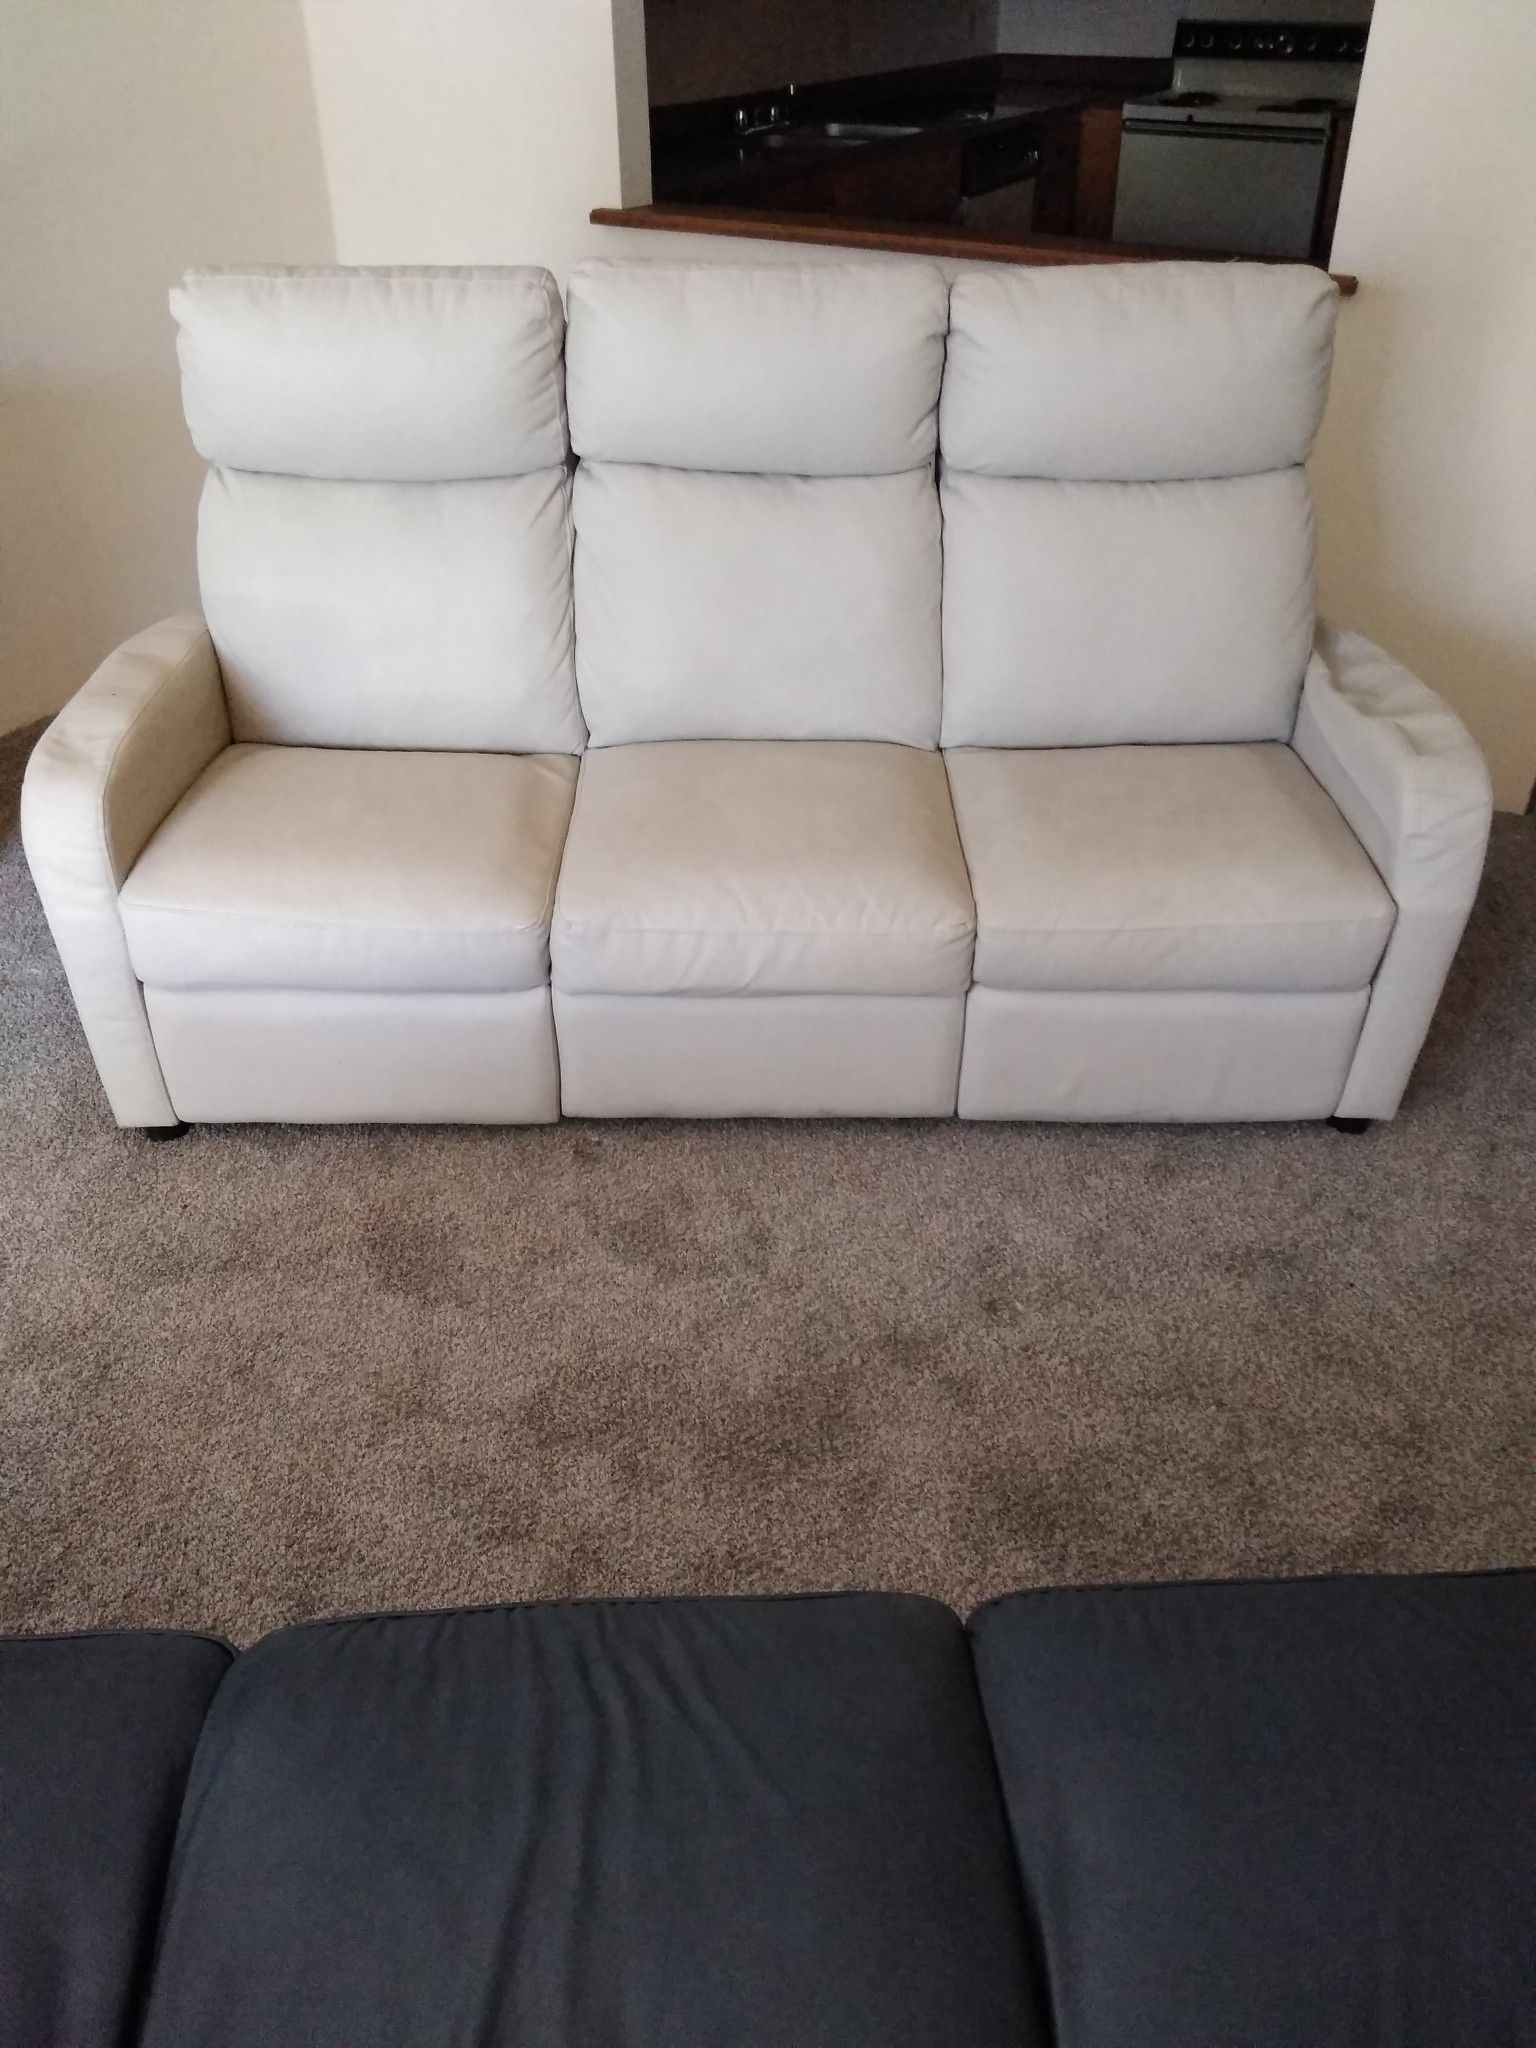 COUCH WITH RECLINERS